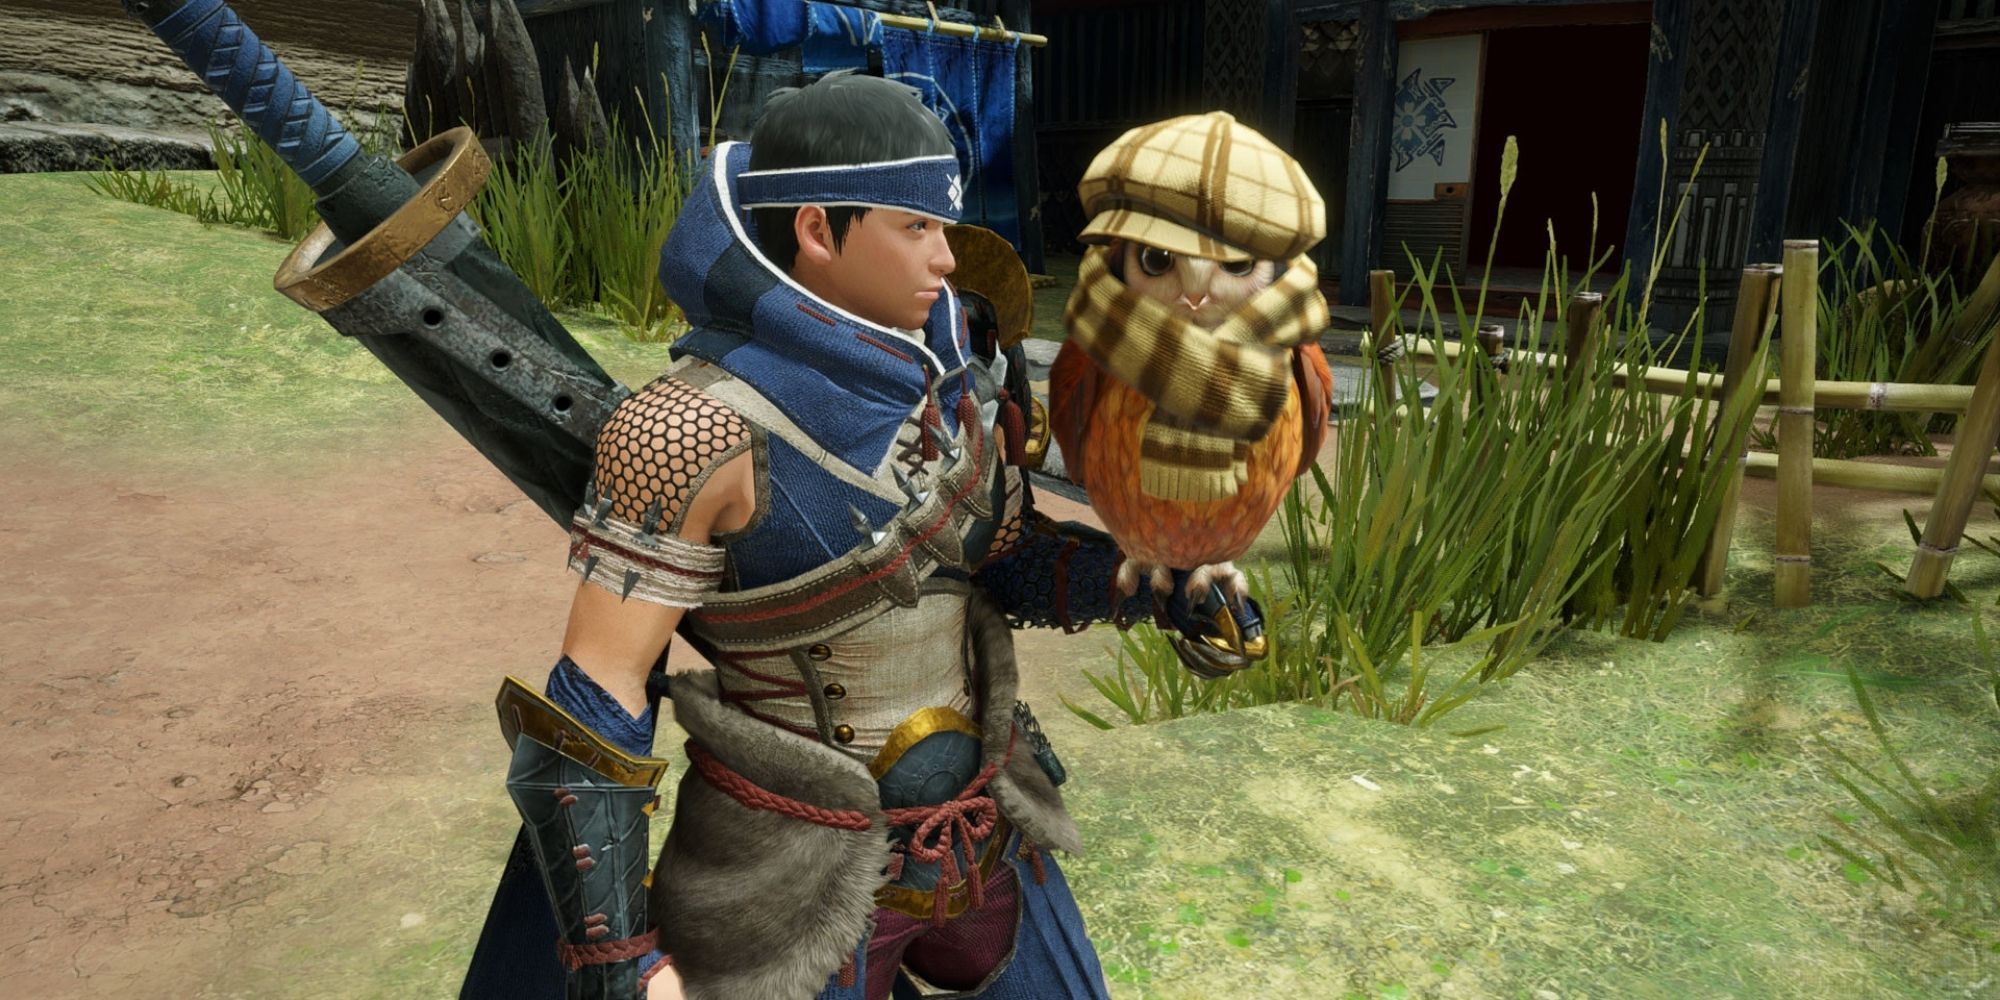 Monster Hunter Rise Hunter Has Cohoot With Fancy Scarf And Hat On His Arm In The Village